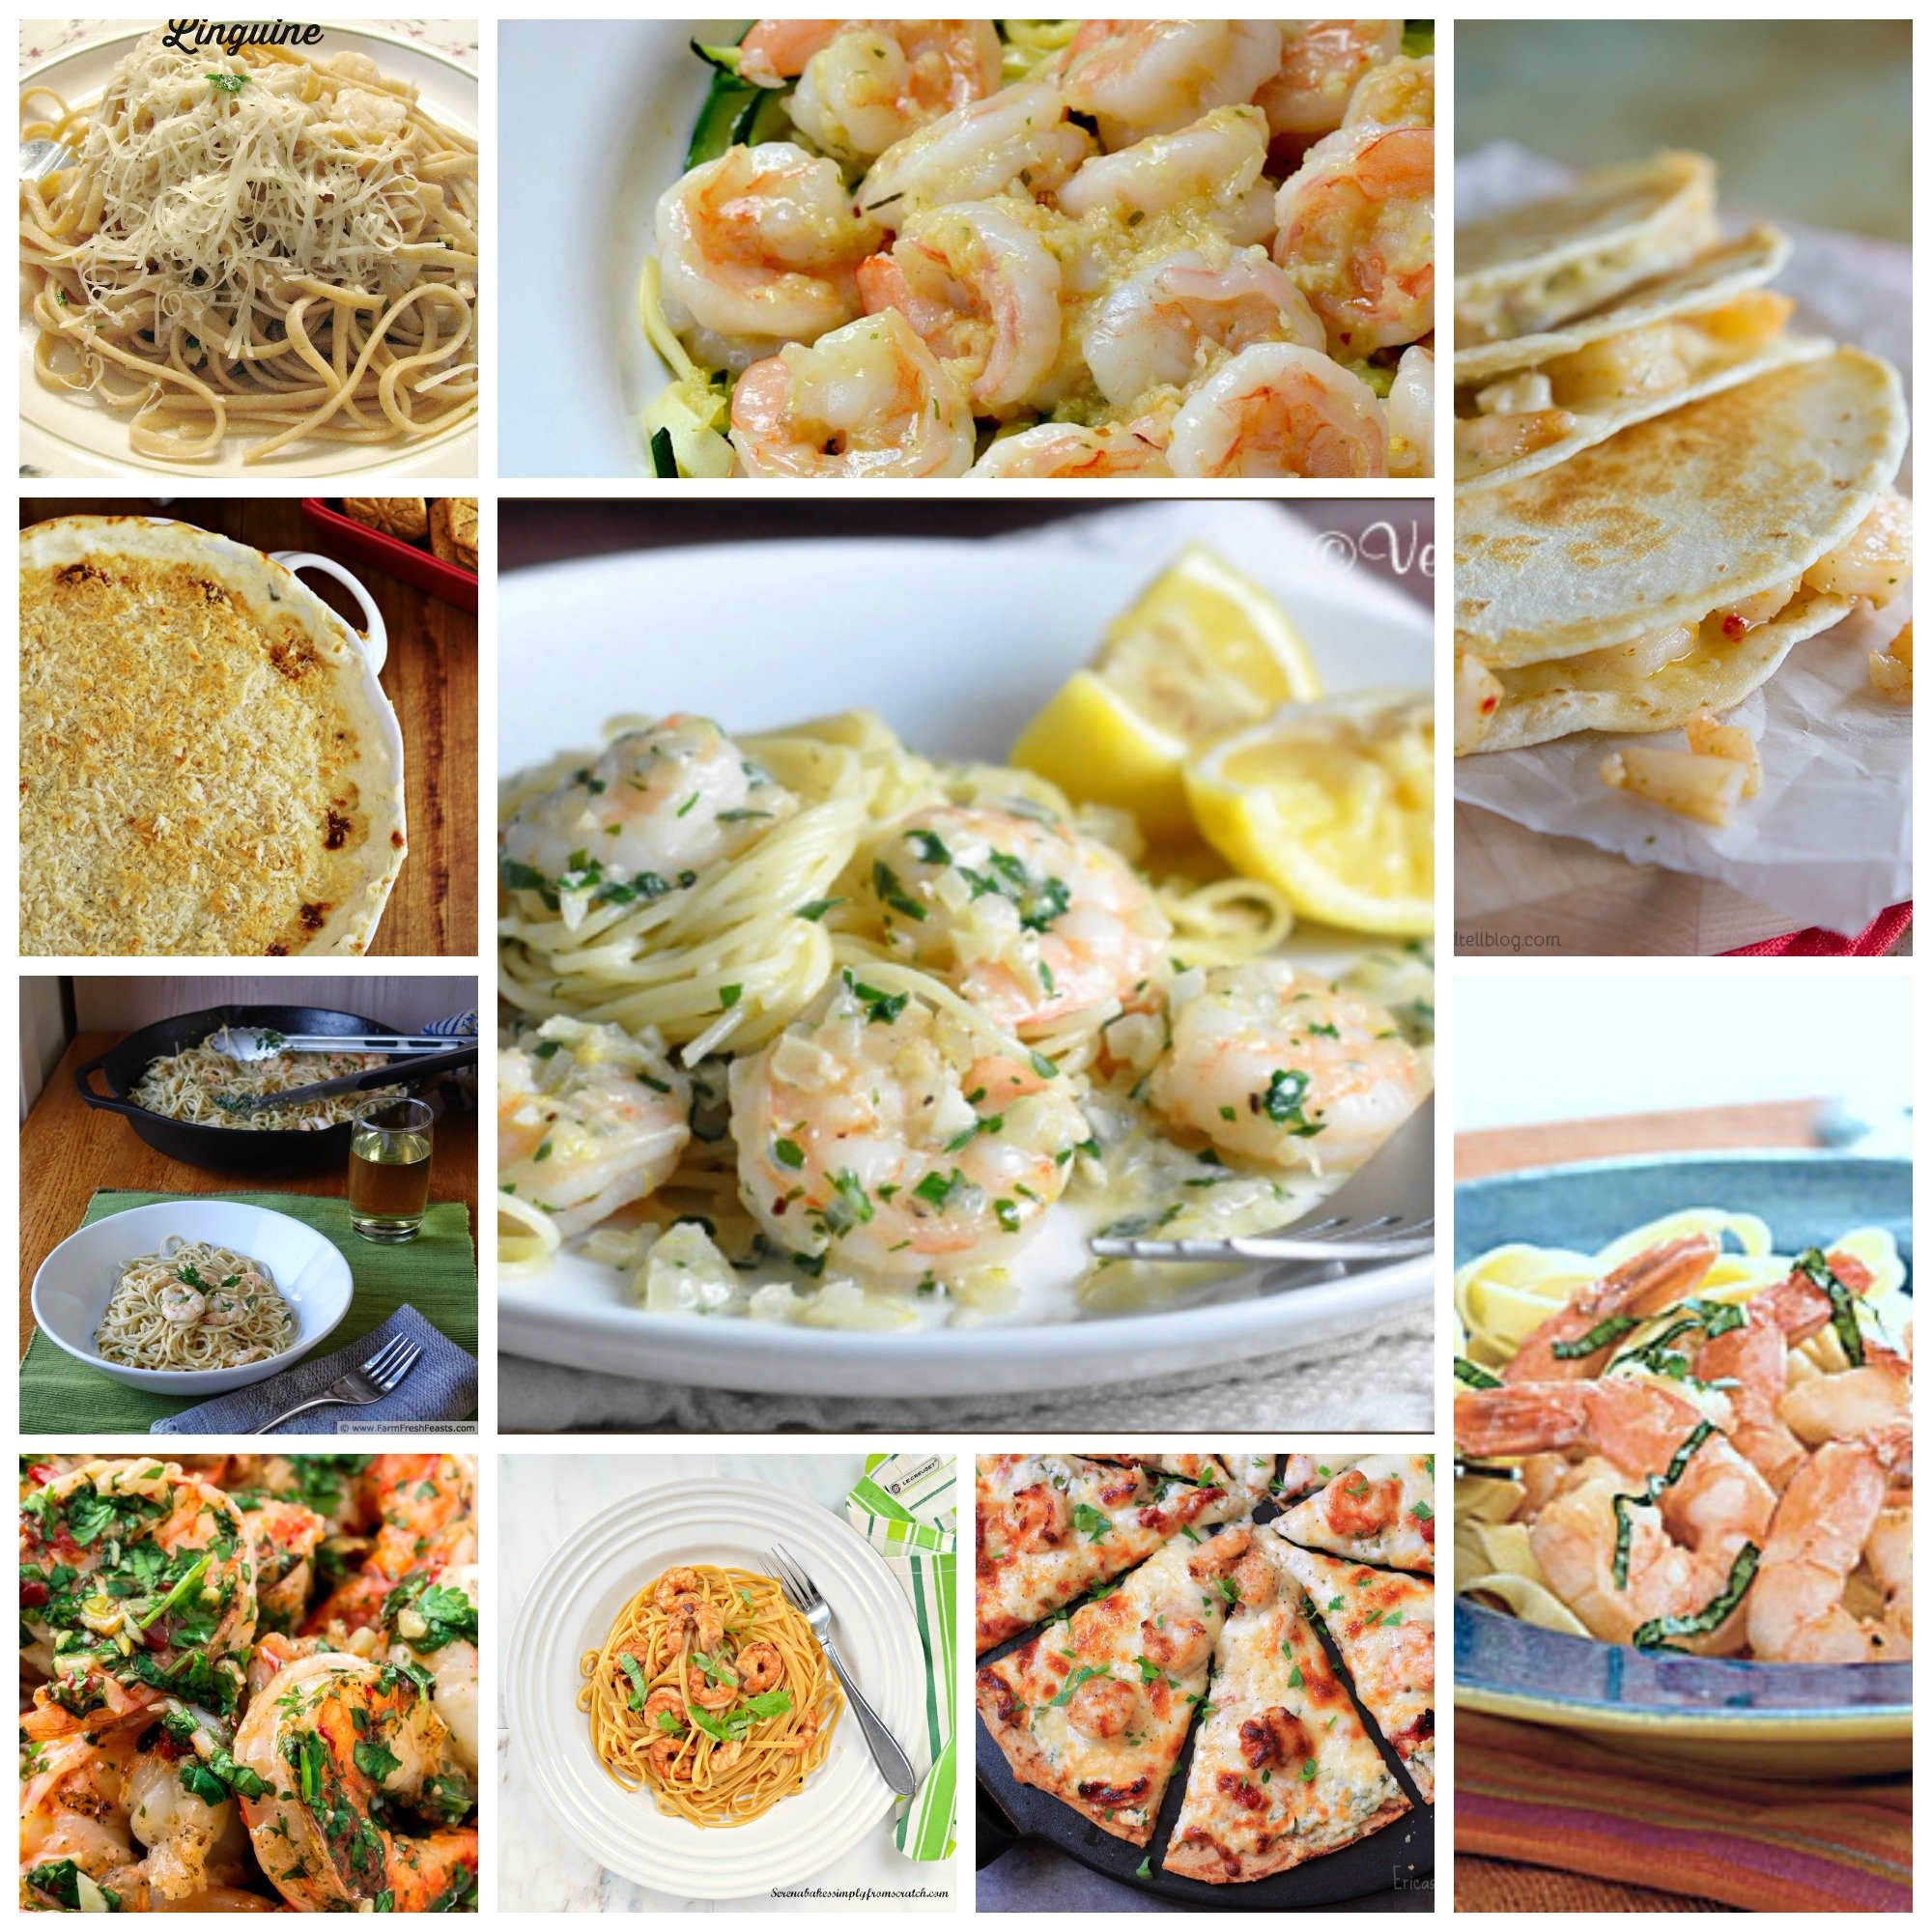 10 Shrimp Scampi Recipes- April 29 is National Shrimp Scampi Day, and this collection includes recipes from traditional shrimp scampi to non-traditional like quesdillas and pizza! 